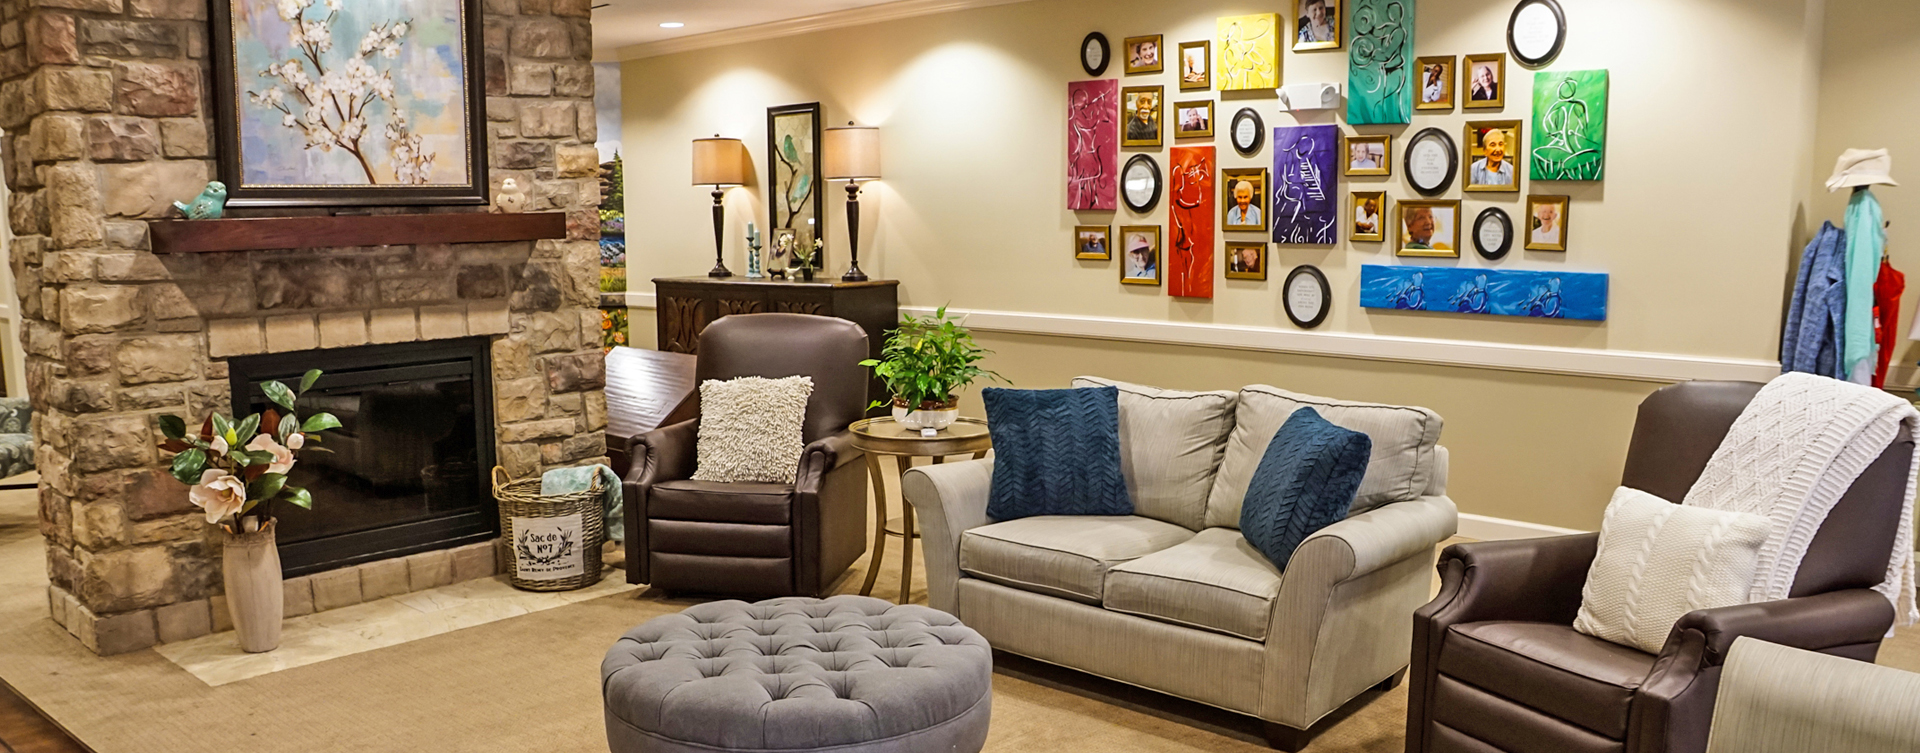 Residents can enjoy furniture covered in cozy fabrics in the Mary B’s living room at Bickford of Aurora